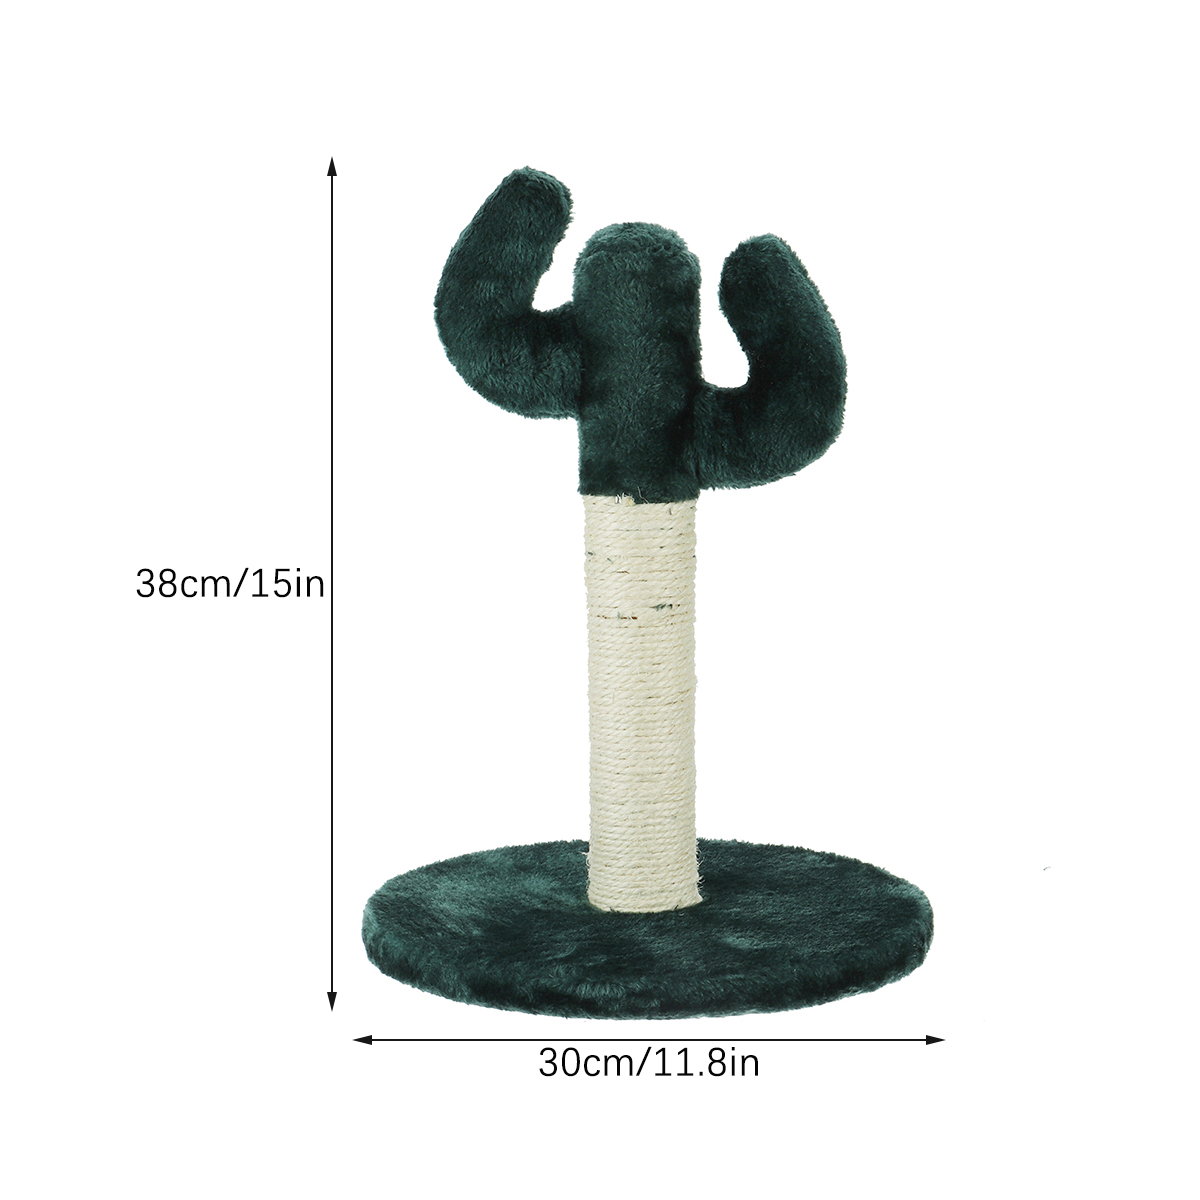 Cute-Cactus-Pet-Cat-Tree-Toys-with-Ball-Scratcher-Posts-for-Cats-Kitten-Climbing-Tree-Cat-Toy-Protec-1914852-5